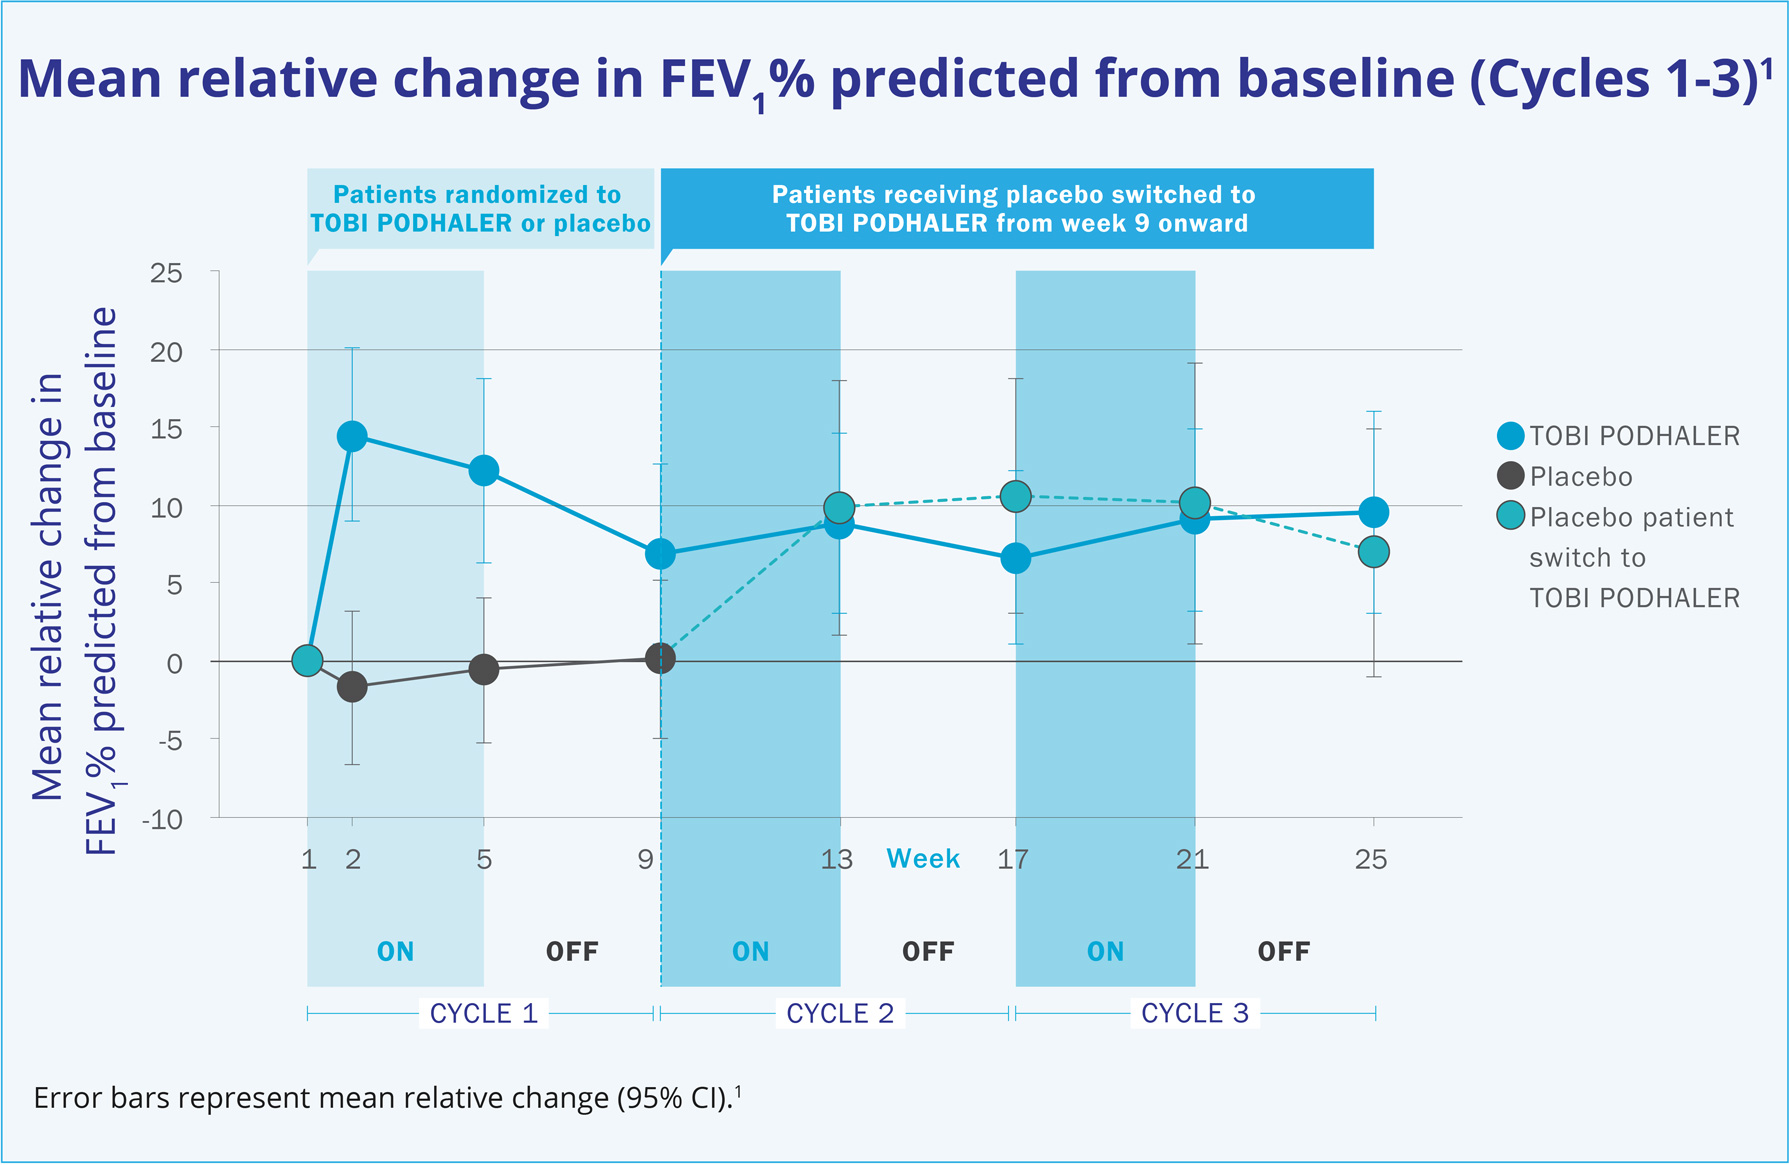 Line graph comparing mean relative change in FEV in patients randomized to TOBI PODHALER or placebo